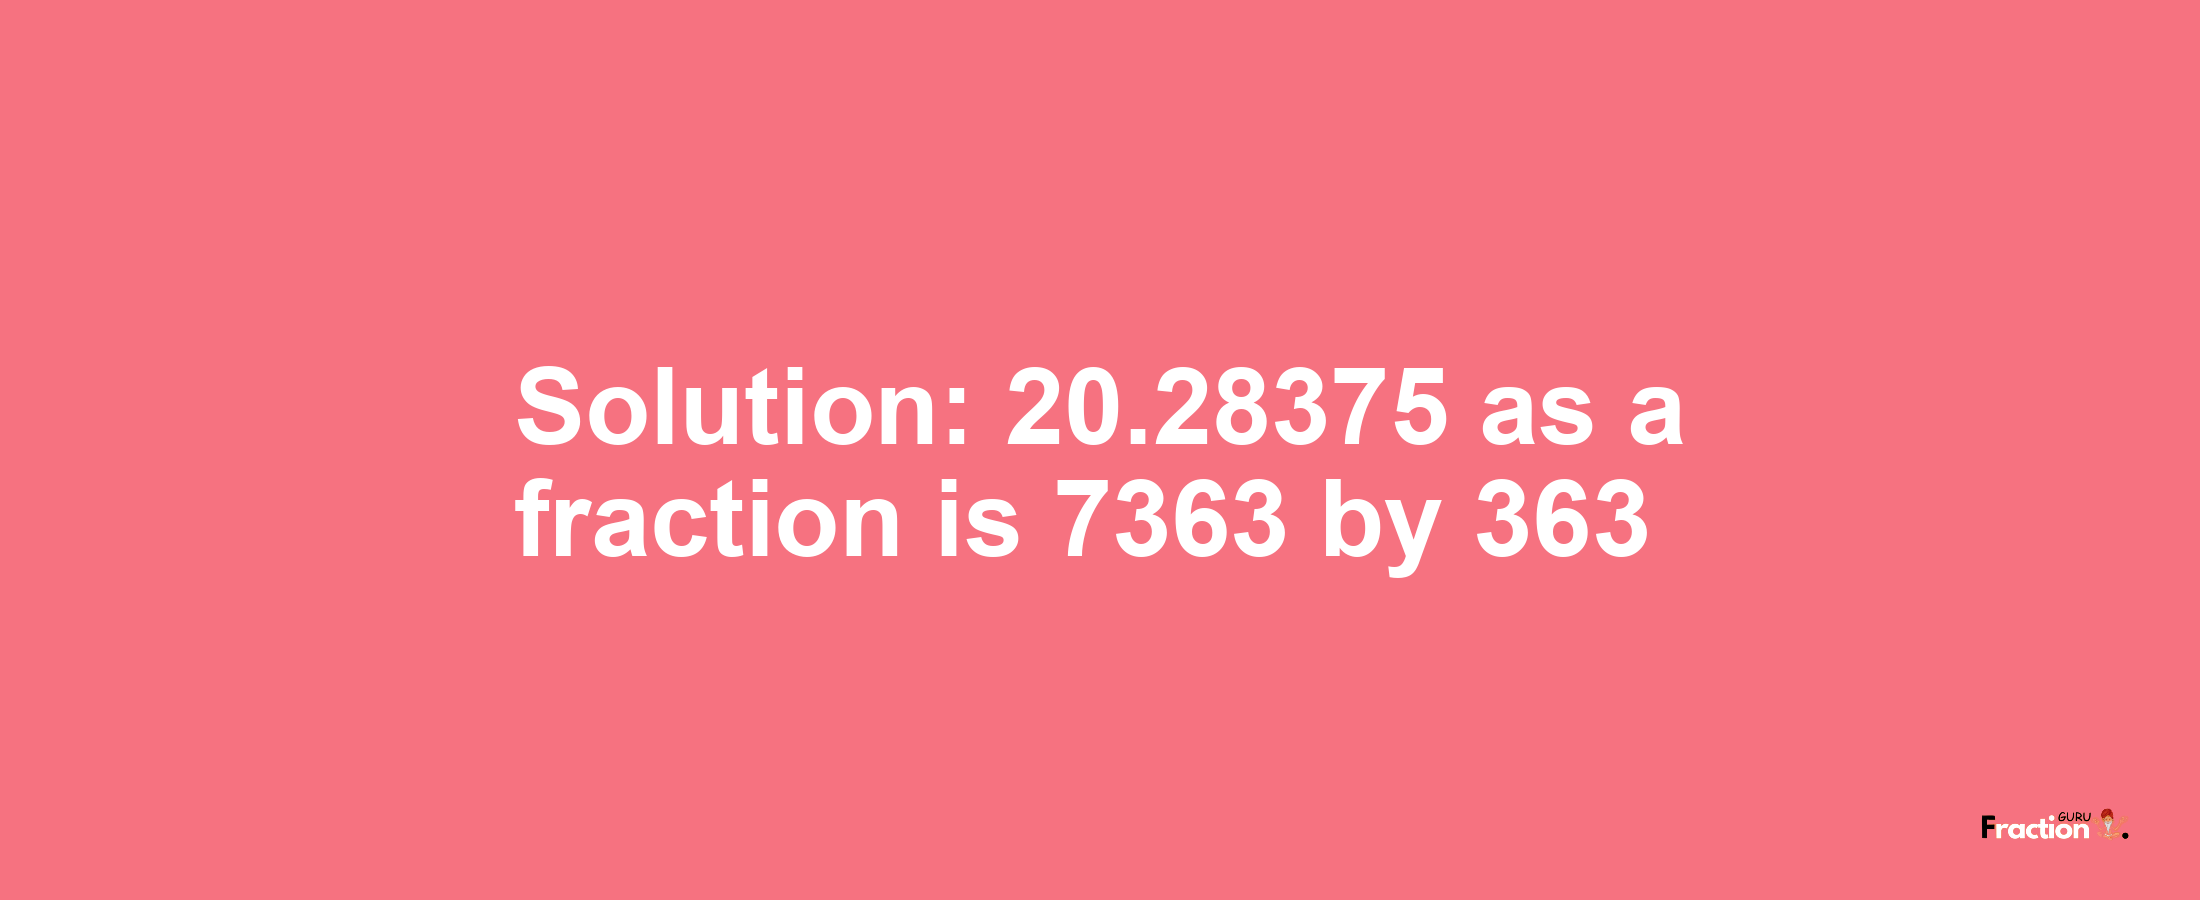 Solution:20.28375 as a fraction is 7363/363